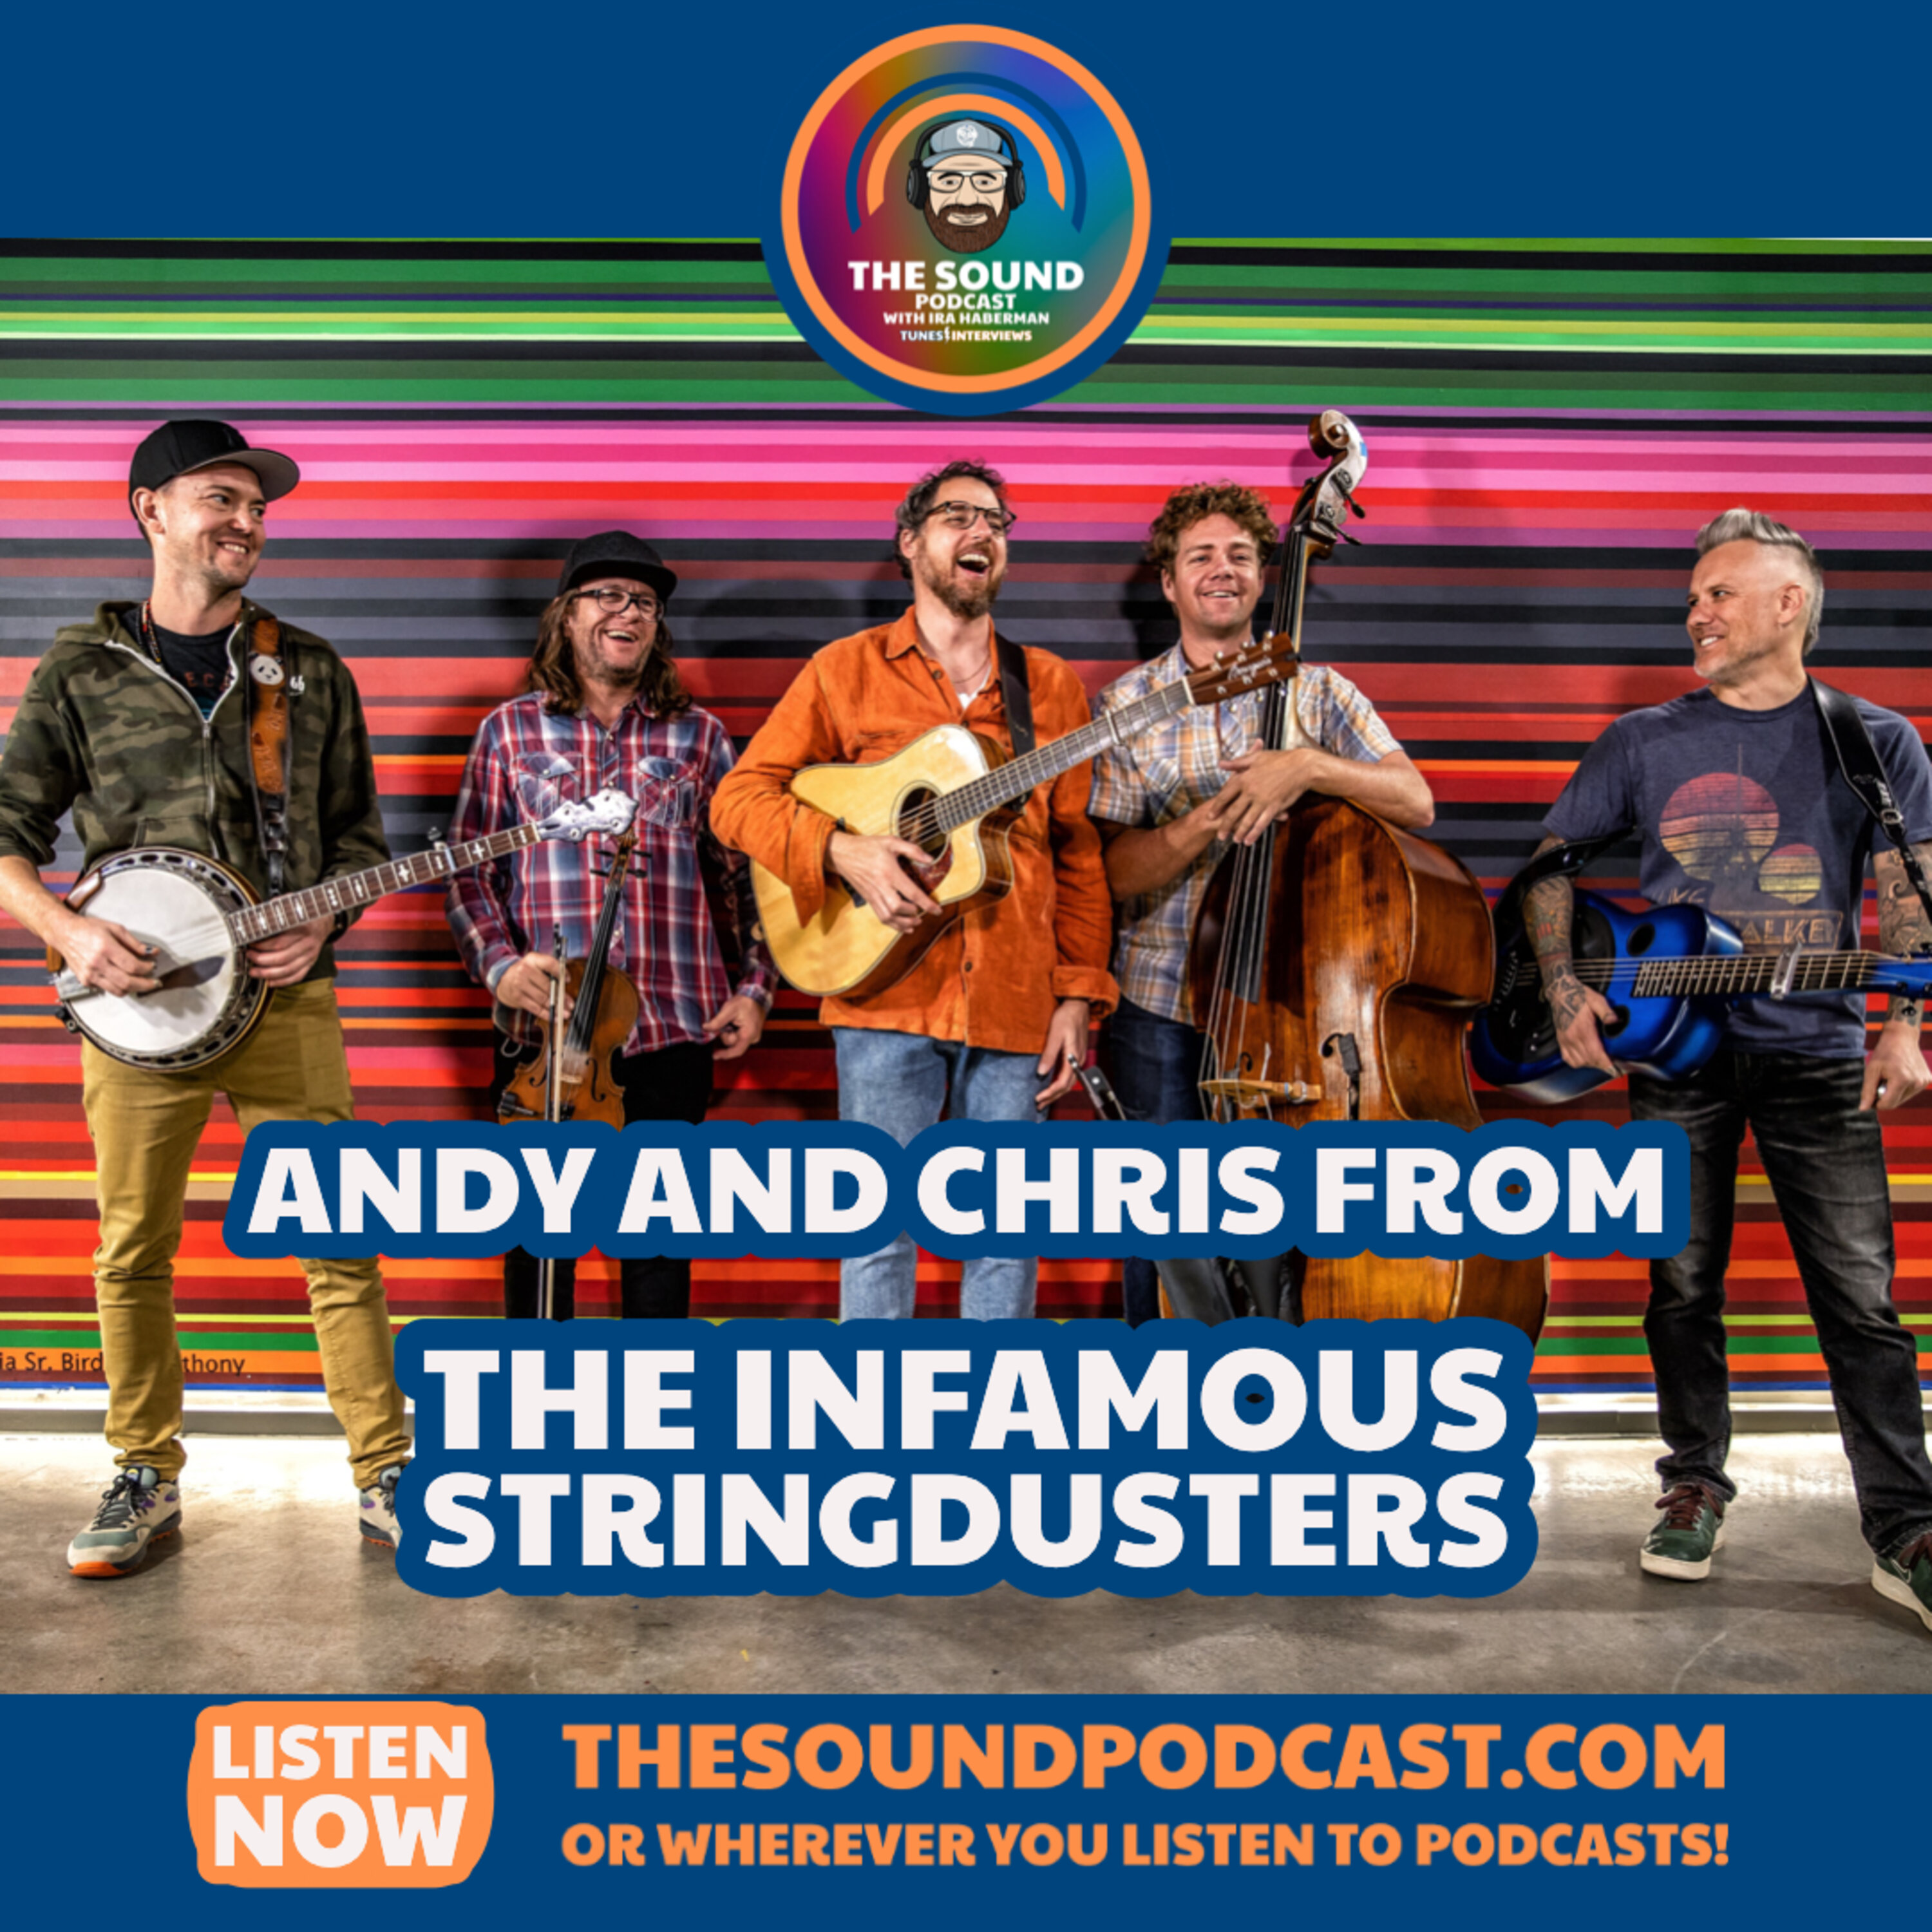 Andy and Chris from The Infamous Stringdusters Image